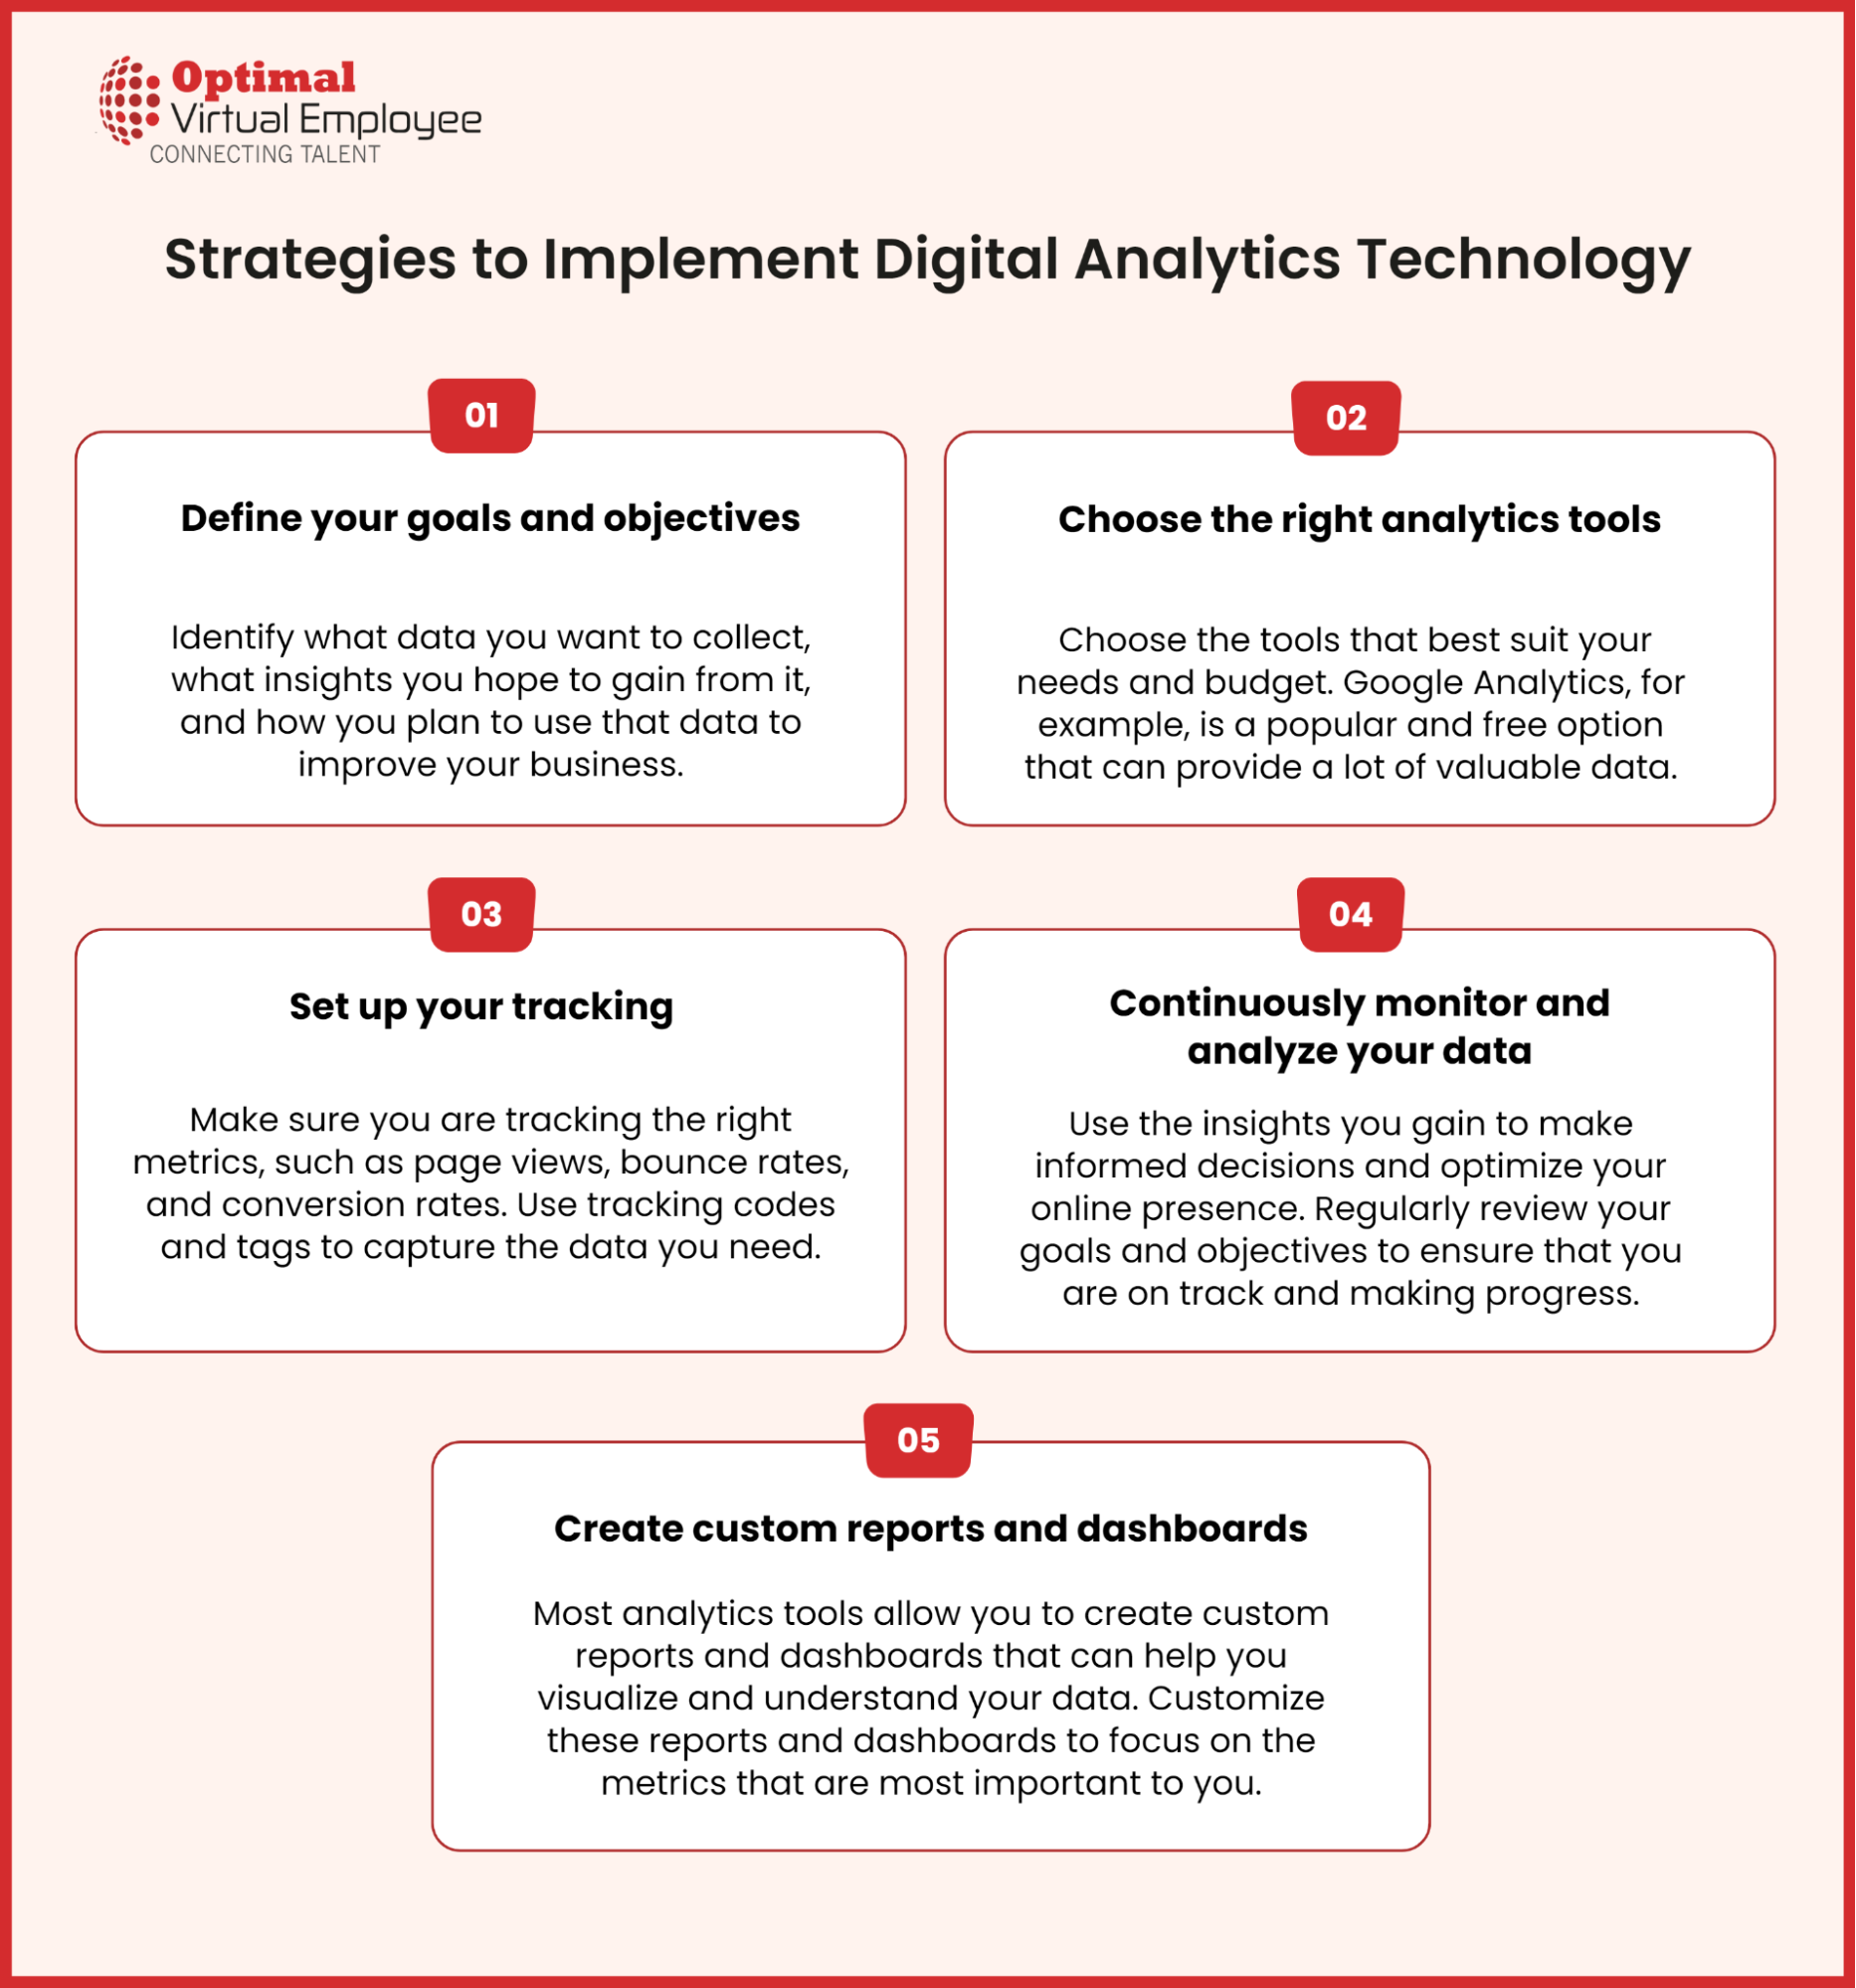 Strategies to Implement Digital Analytics Technology